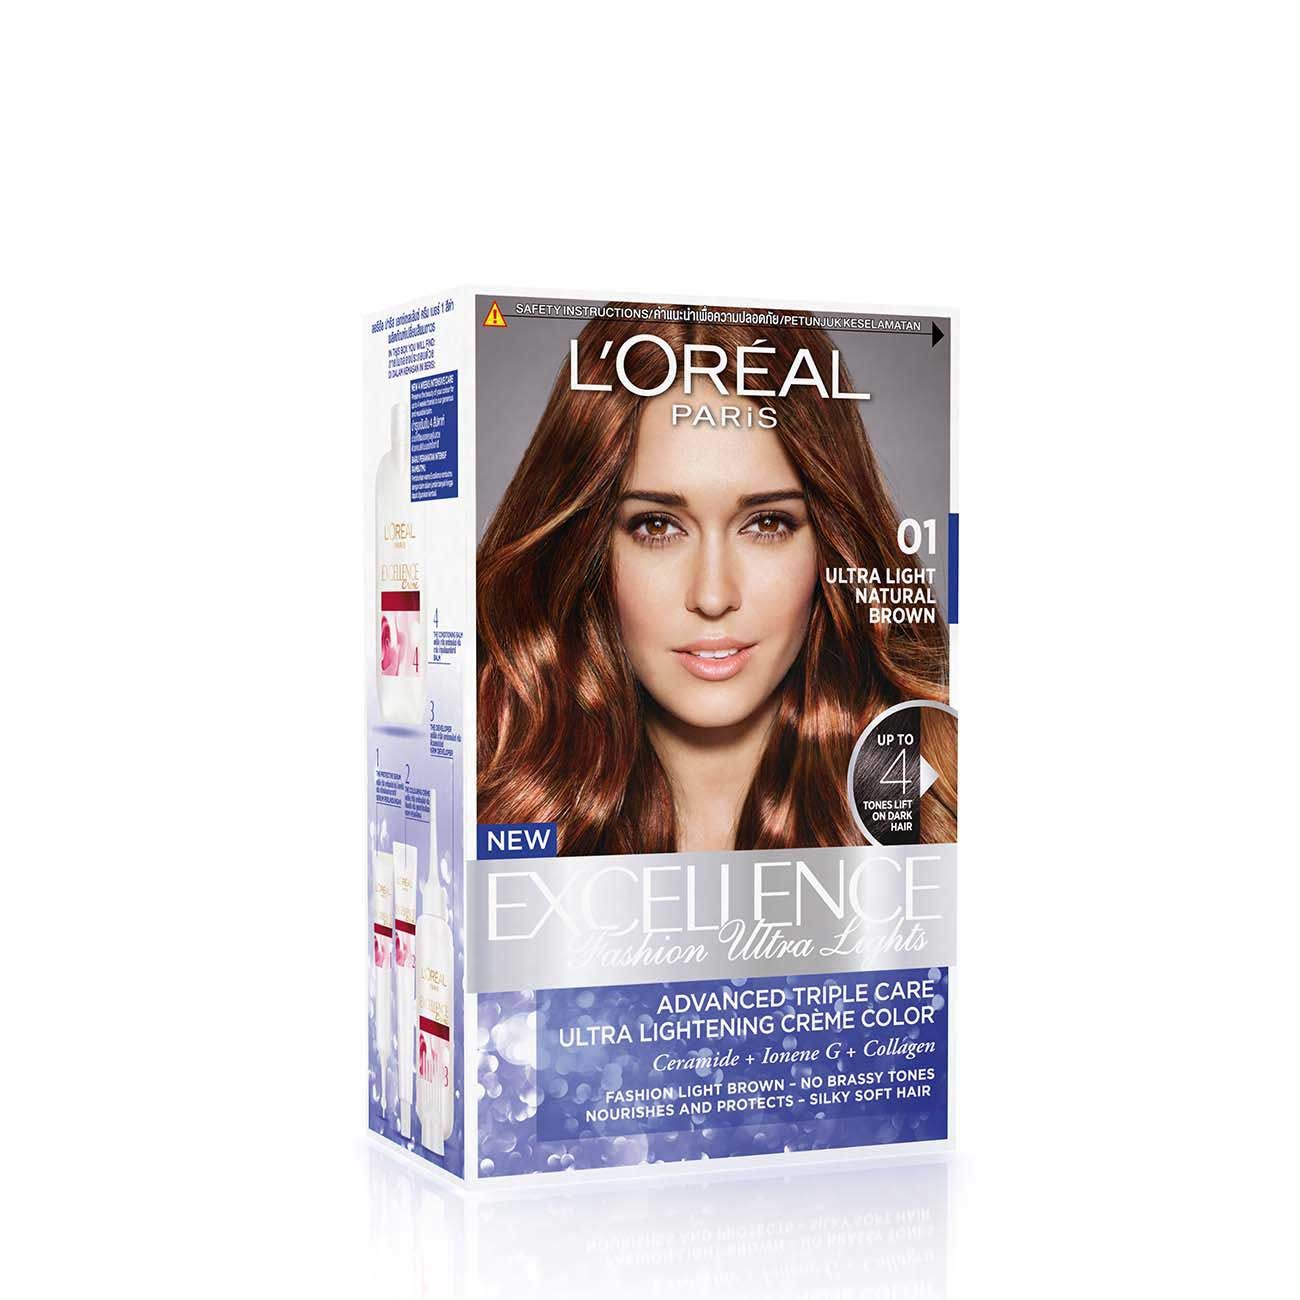 L'Oreal Paris Excellence Fashion Ultra Lights 01 Nat Brown - 1